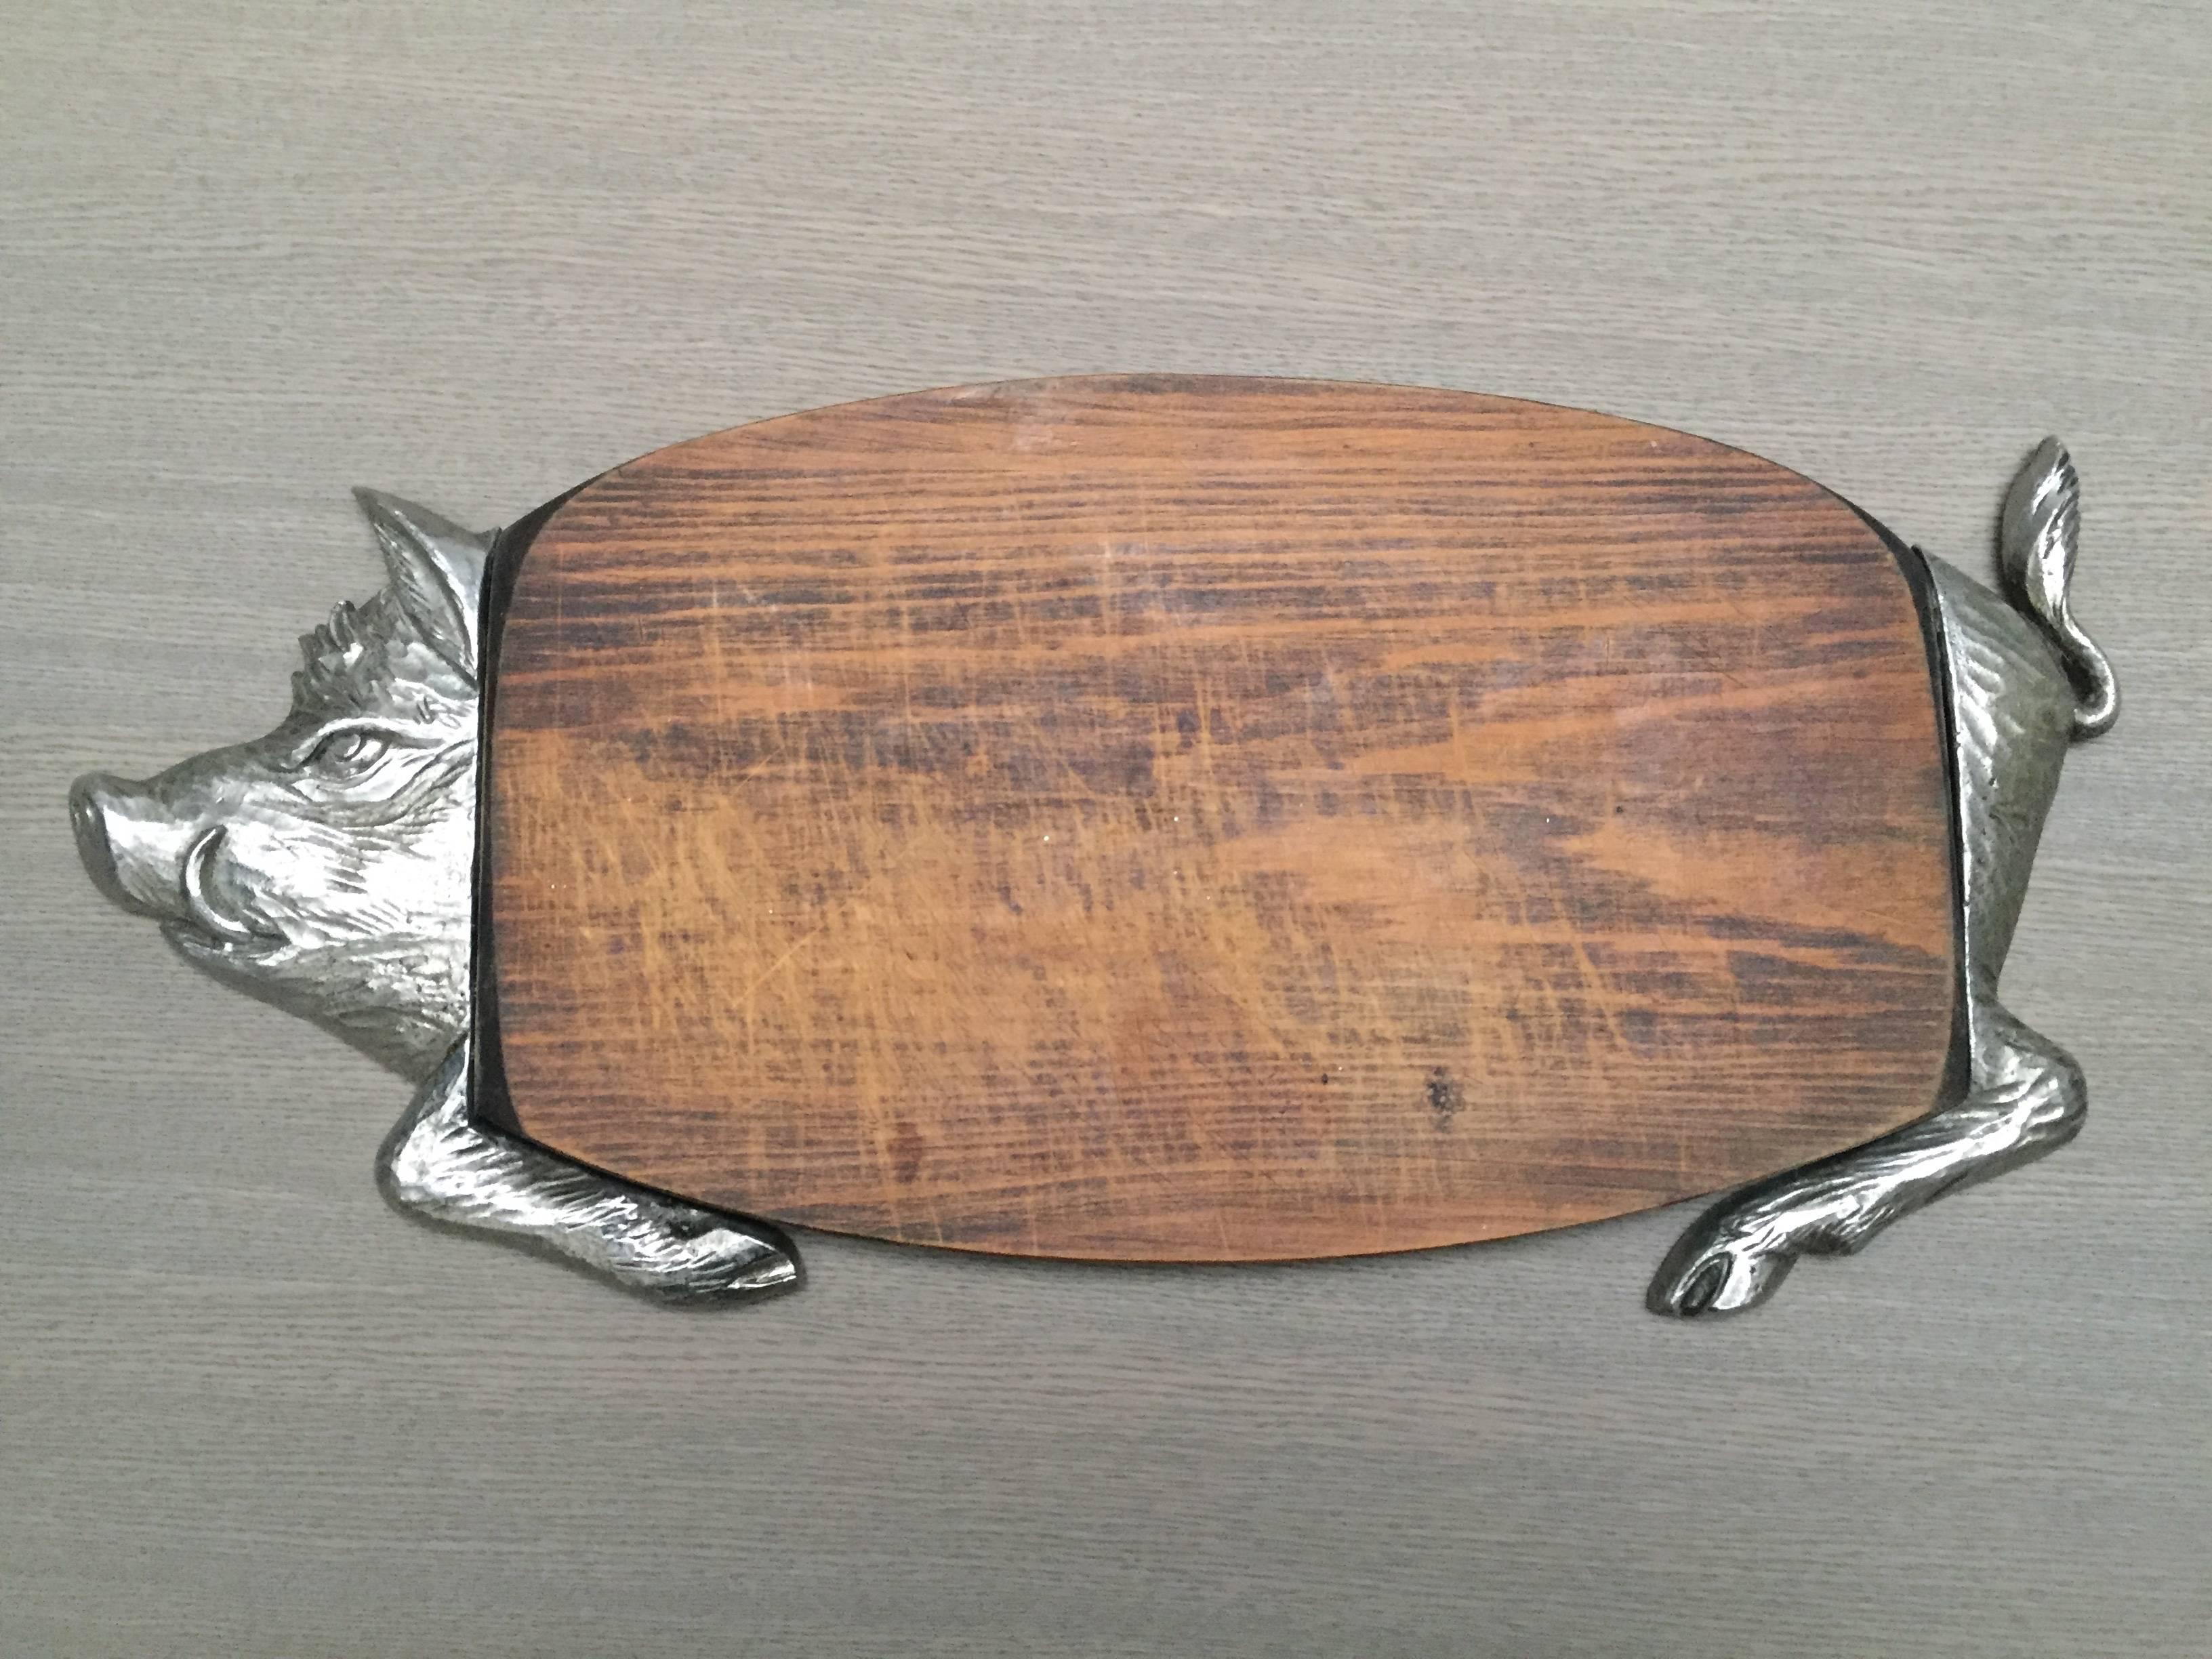 A vintage French charcuterie serving board in the form of a wild boar. Charcuterie consist primarily of pork products such as sausage, terrines, galantines, ballotines, pâtés, and confit. The French eat charcuterie with crusty bread daily as a late